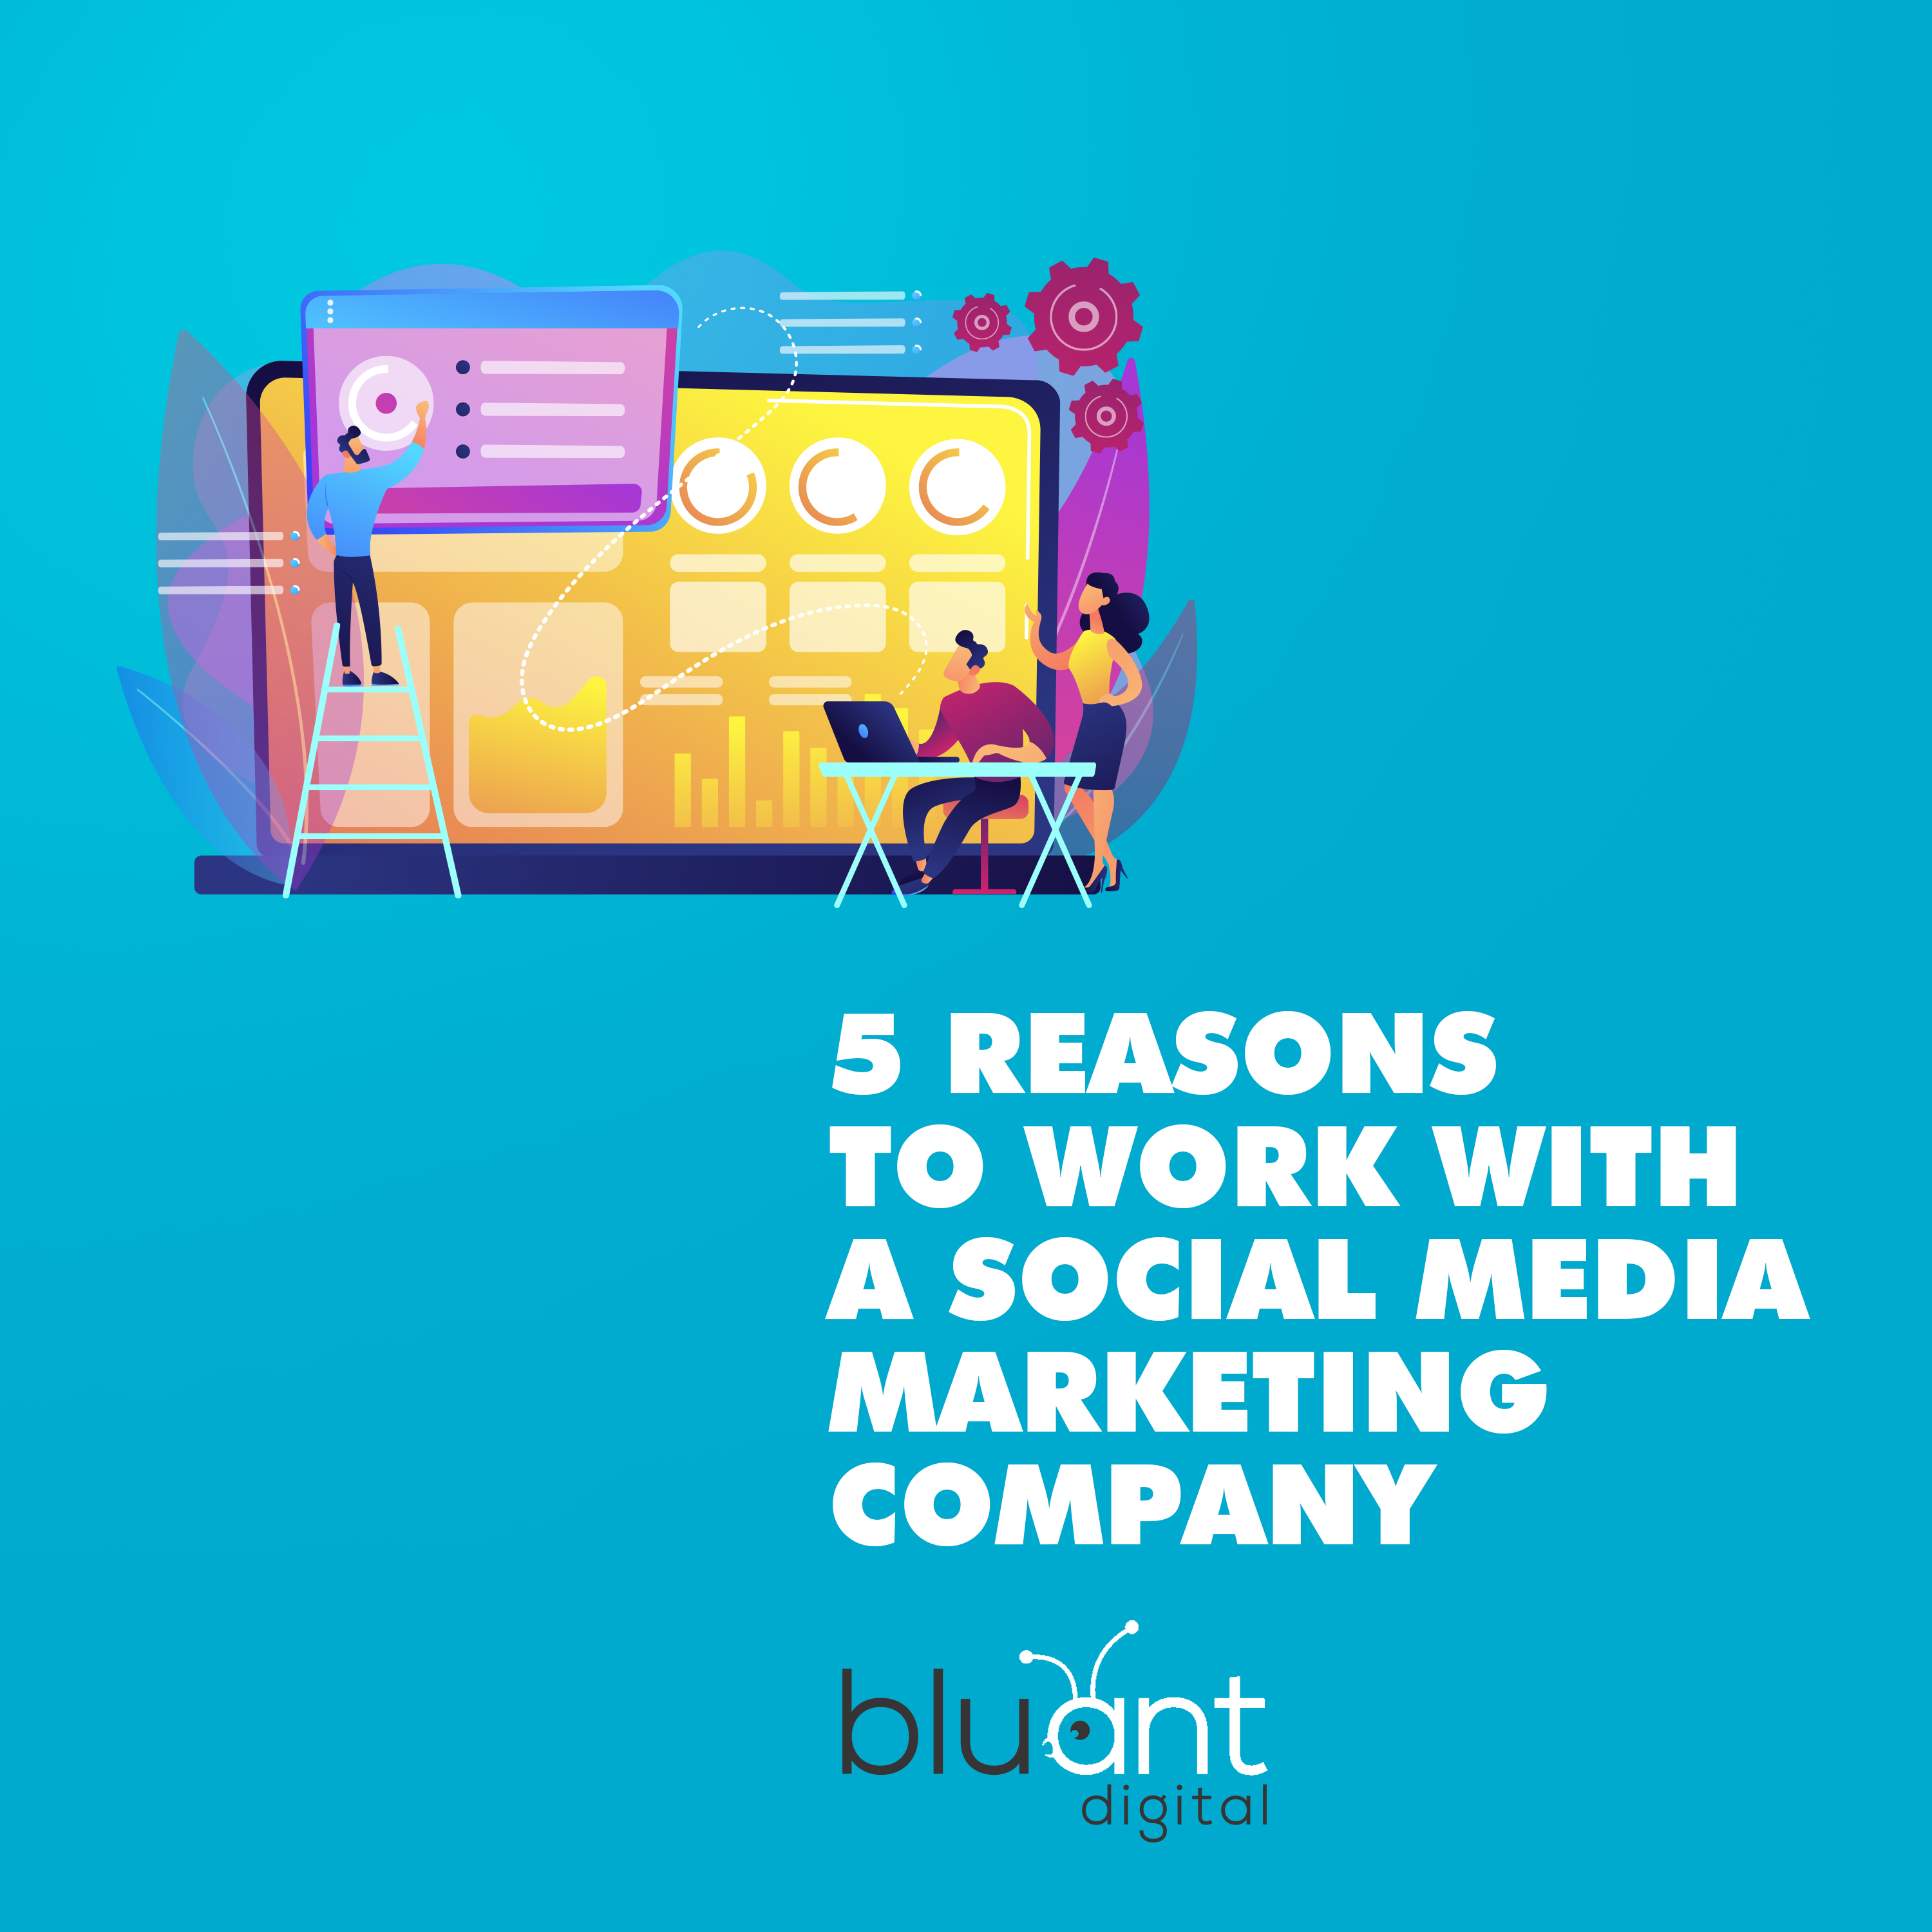 5 Reasons to Work With a Social Media Marketing Company